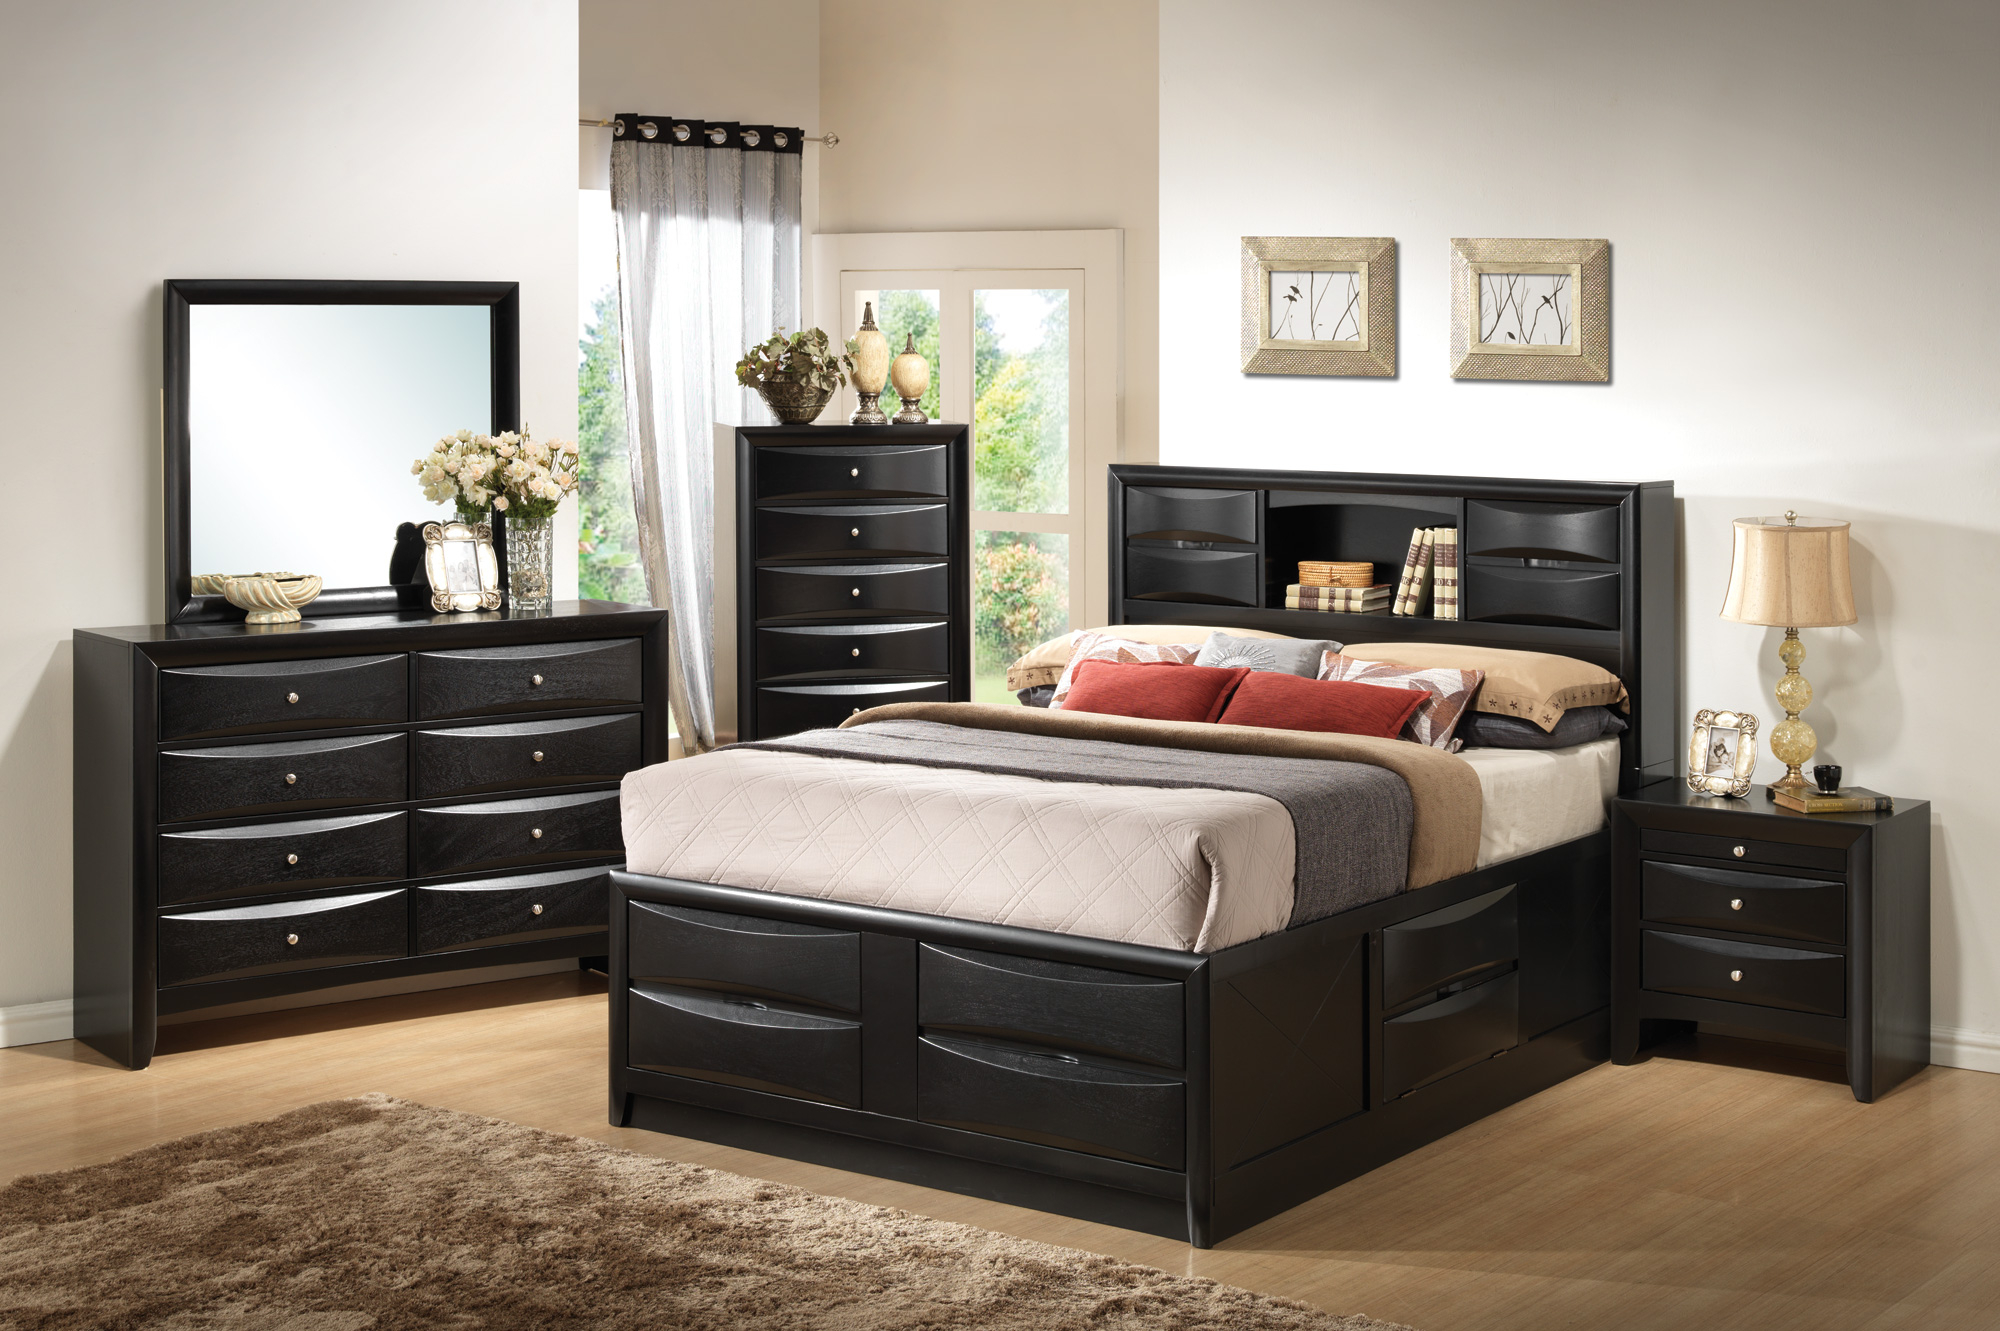 Coaster Briana Queen 5pc Storage Bedroom Set with dimensions 2000 X 1331